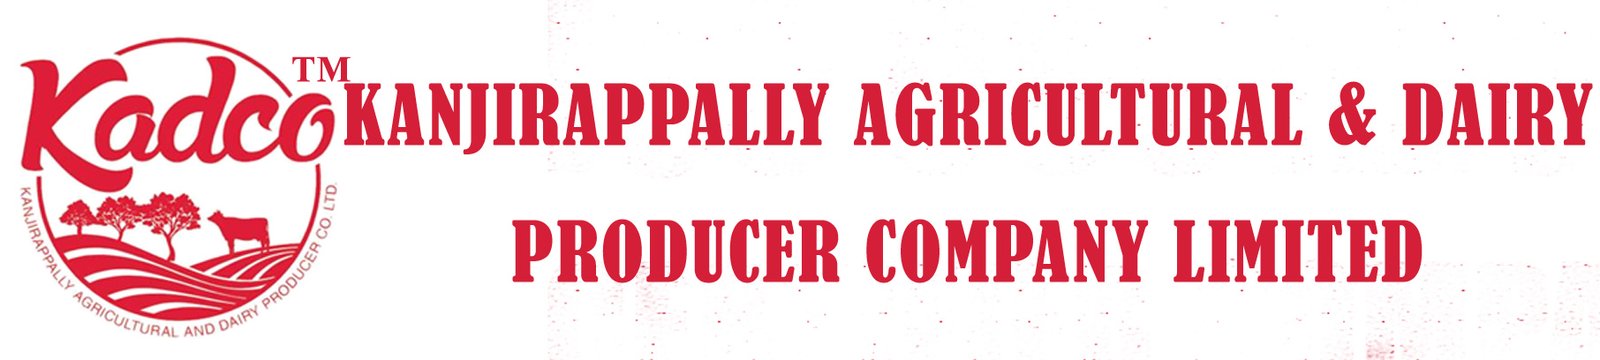 Kanjirappally Agriculture & Dairy Producer Company Limited